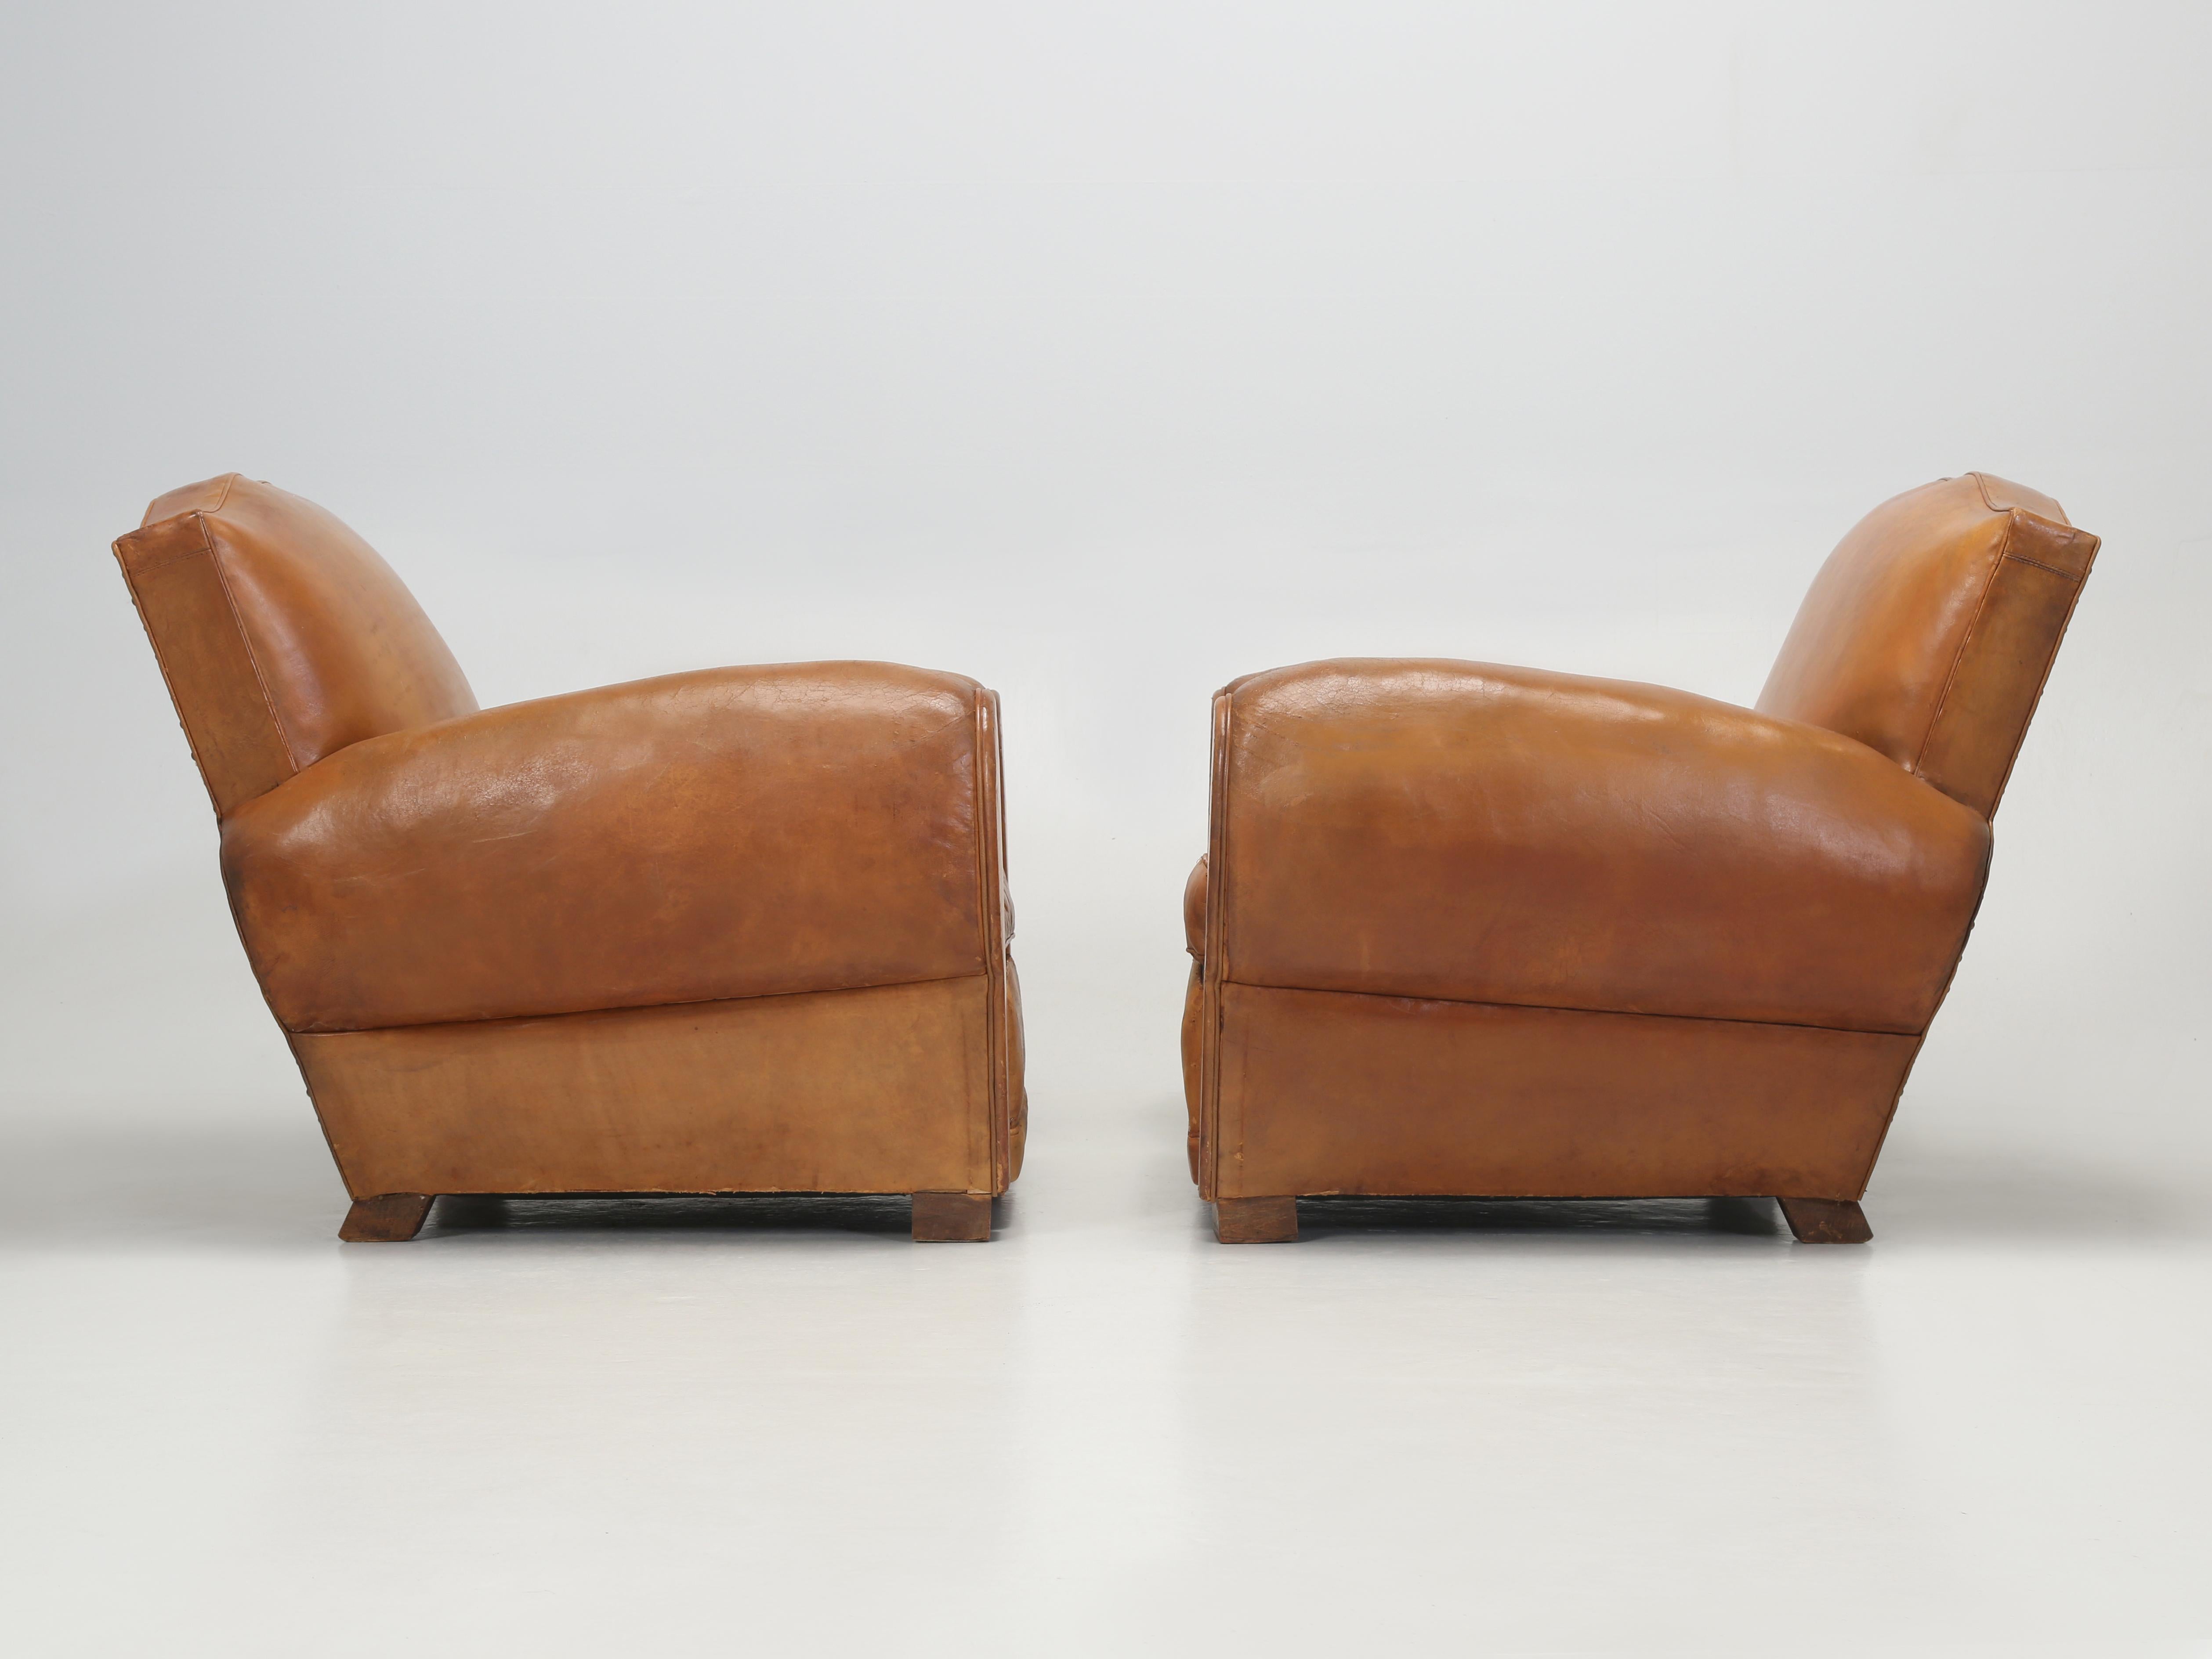 French Art Deco Moustache Original Leather Club Chairs Restored Inside, c1930s  11